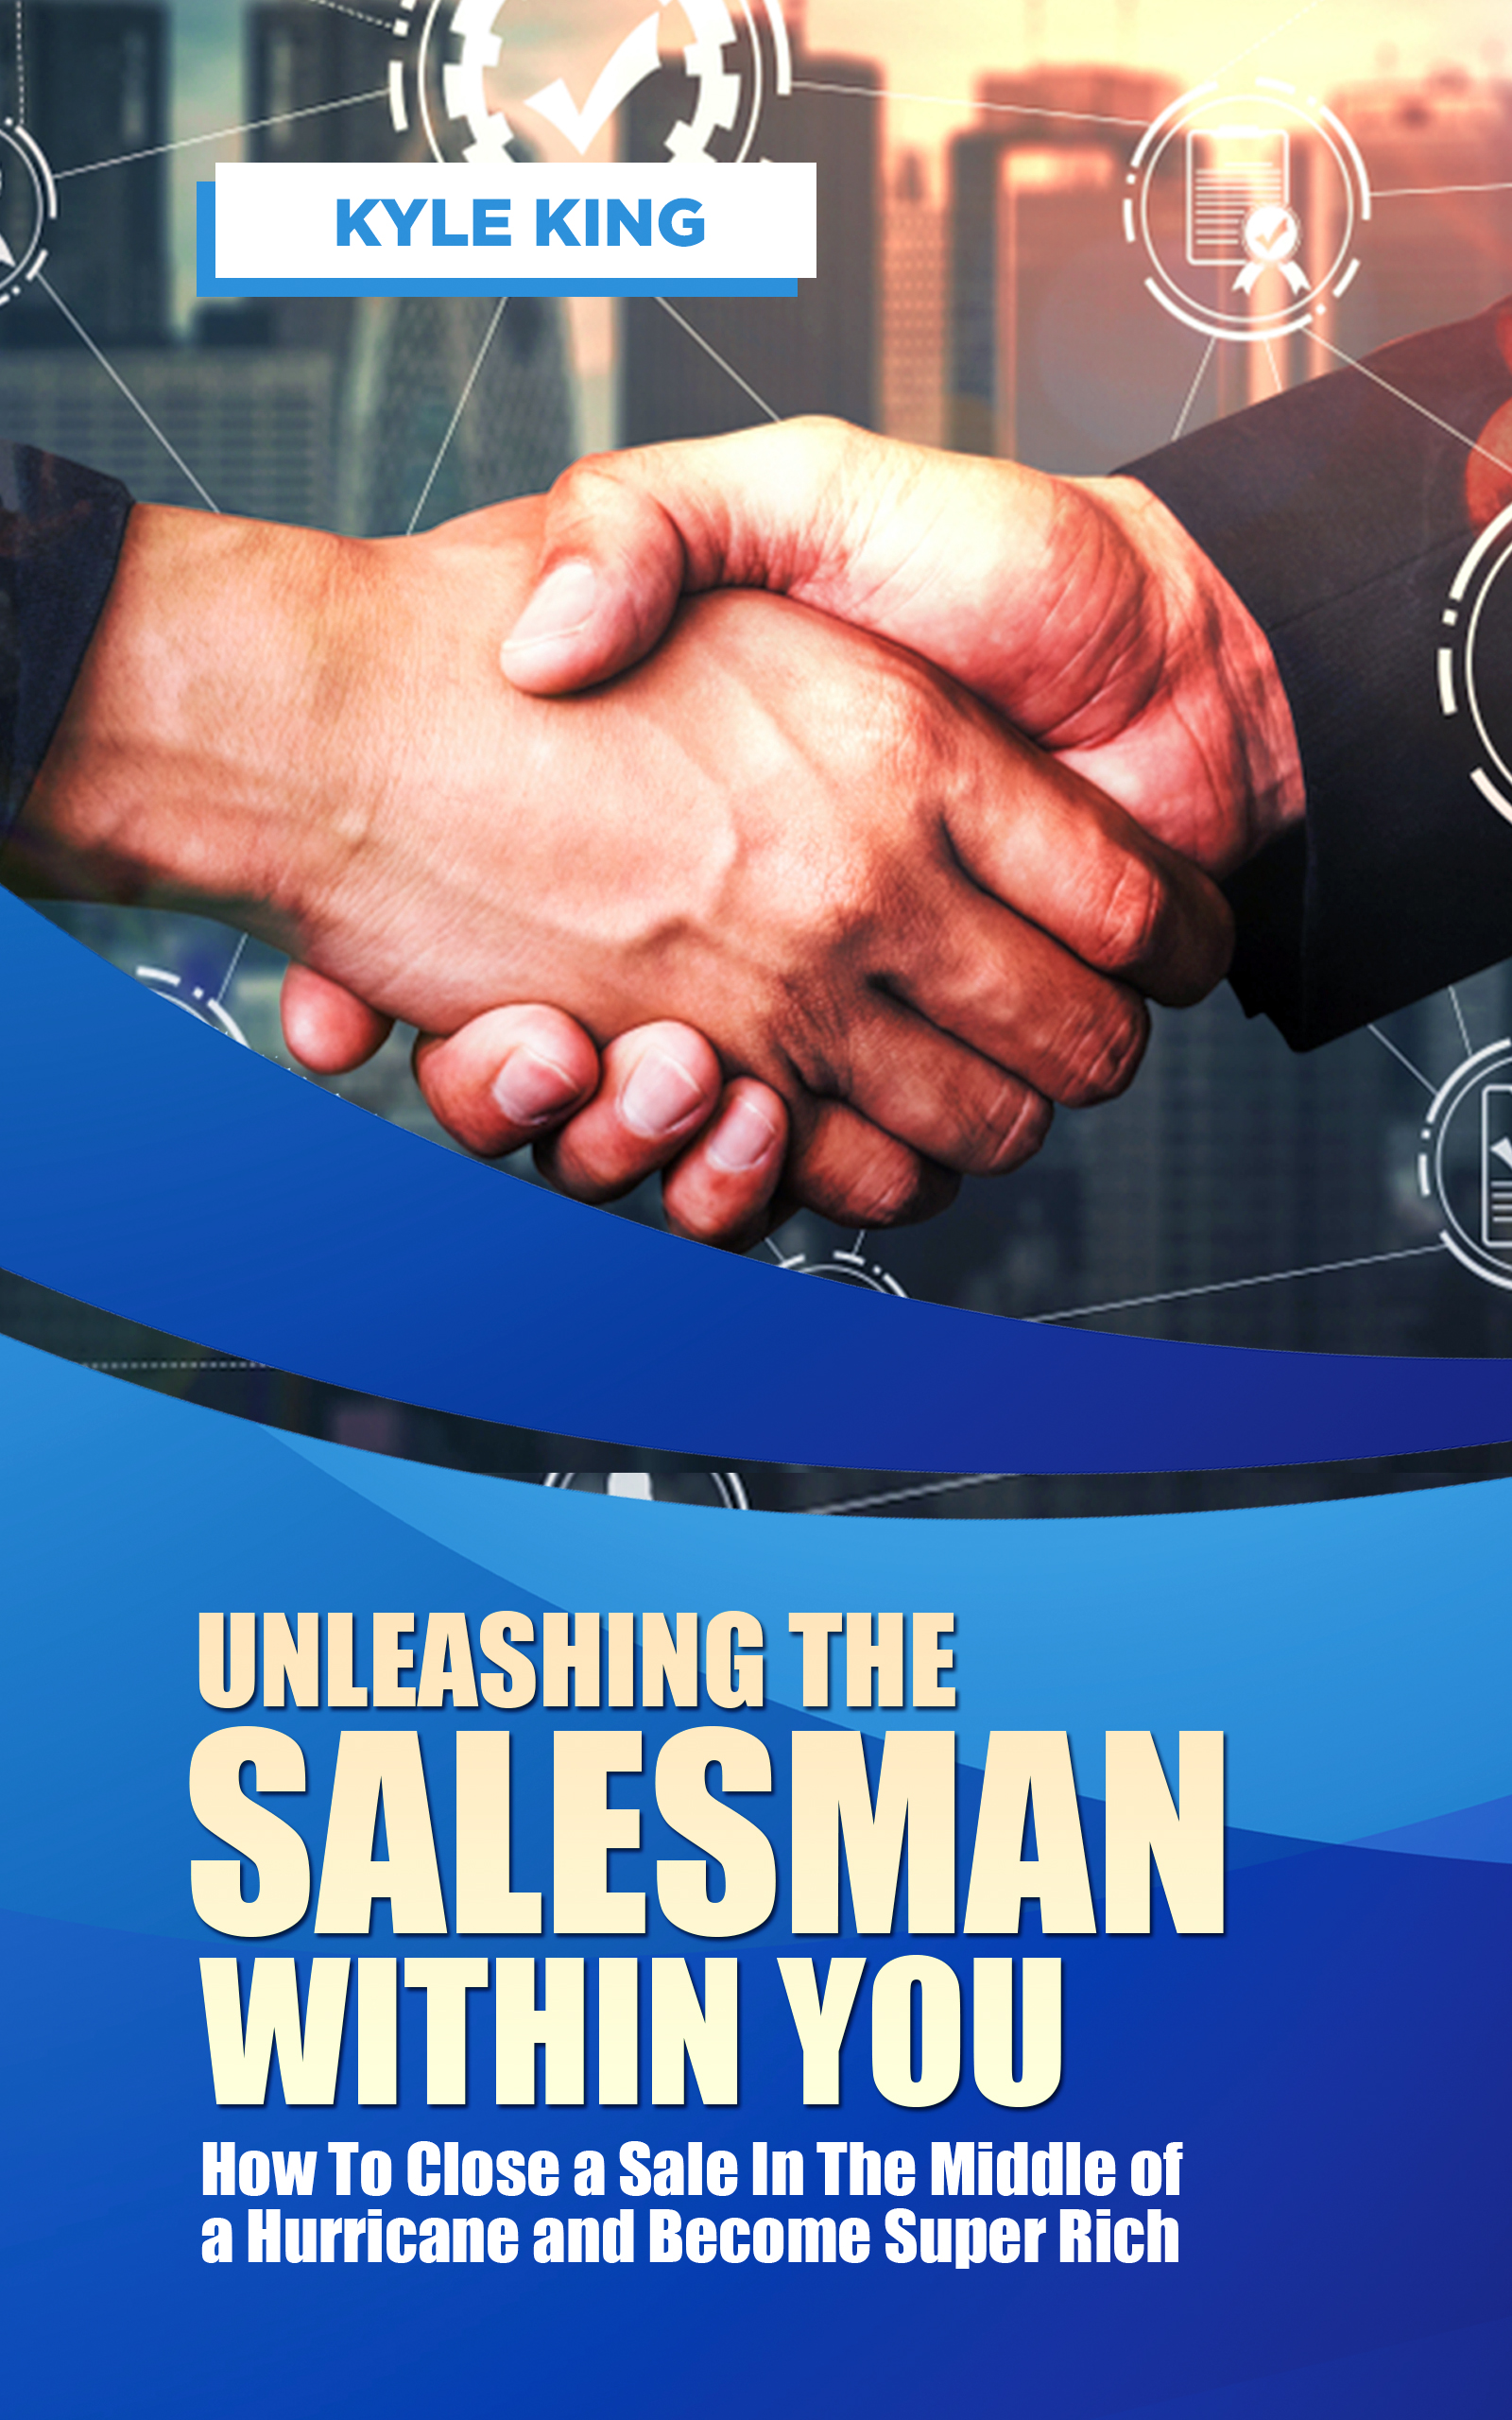 FREE: Unleashing the Salesman Within You: How to Close a Sale in the Middle of a Hurricane and Become Super Rich by Kyle King